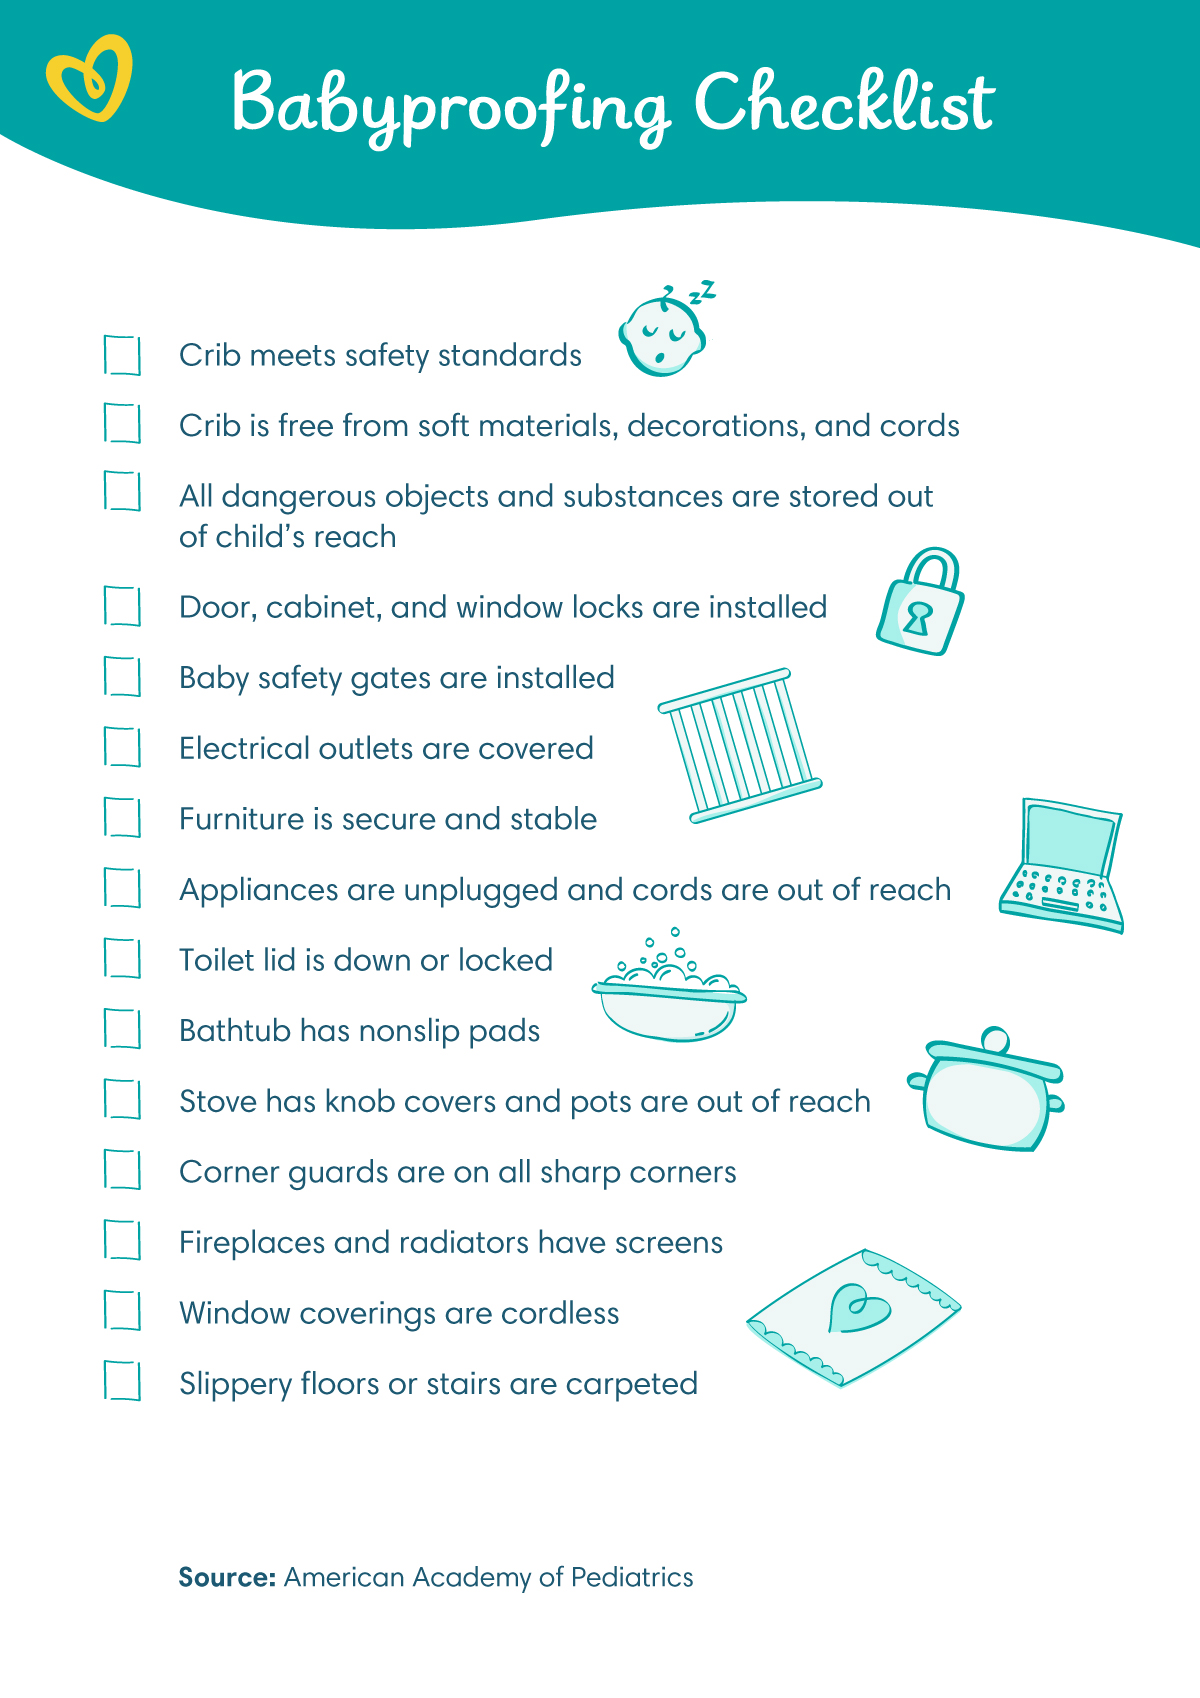 Baby Proofing Your House: Checklist and Tips